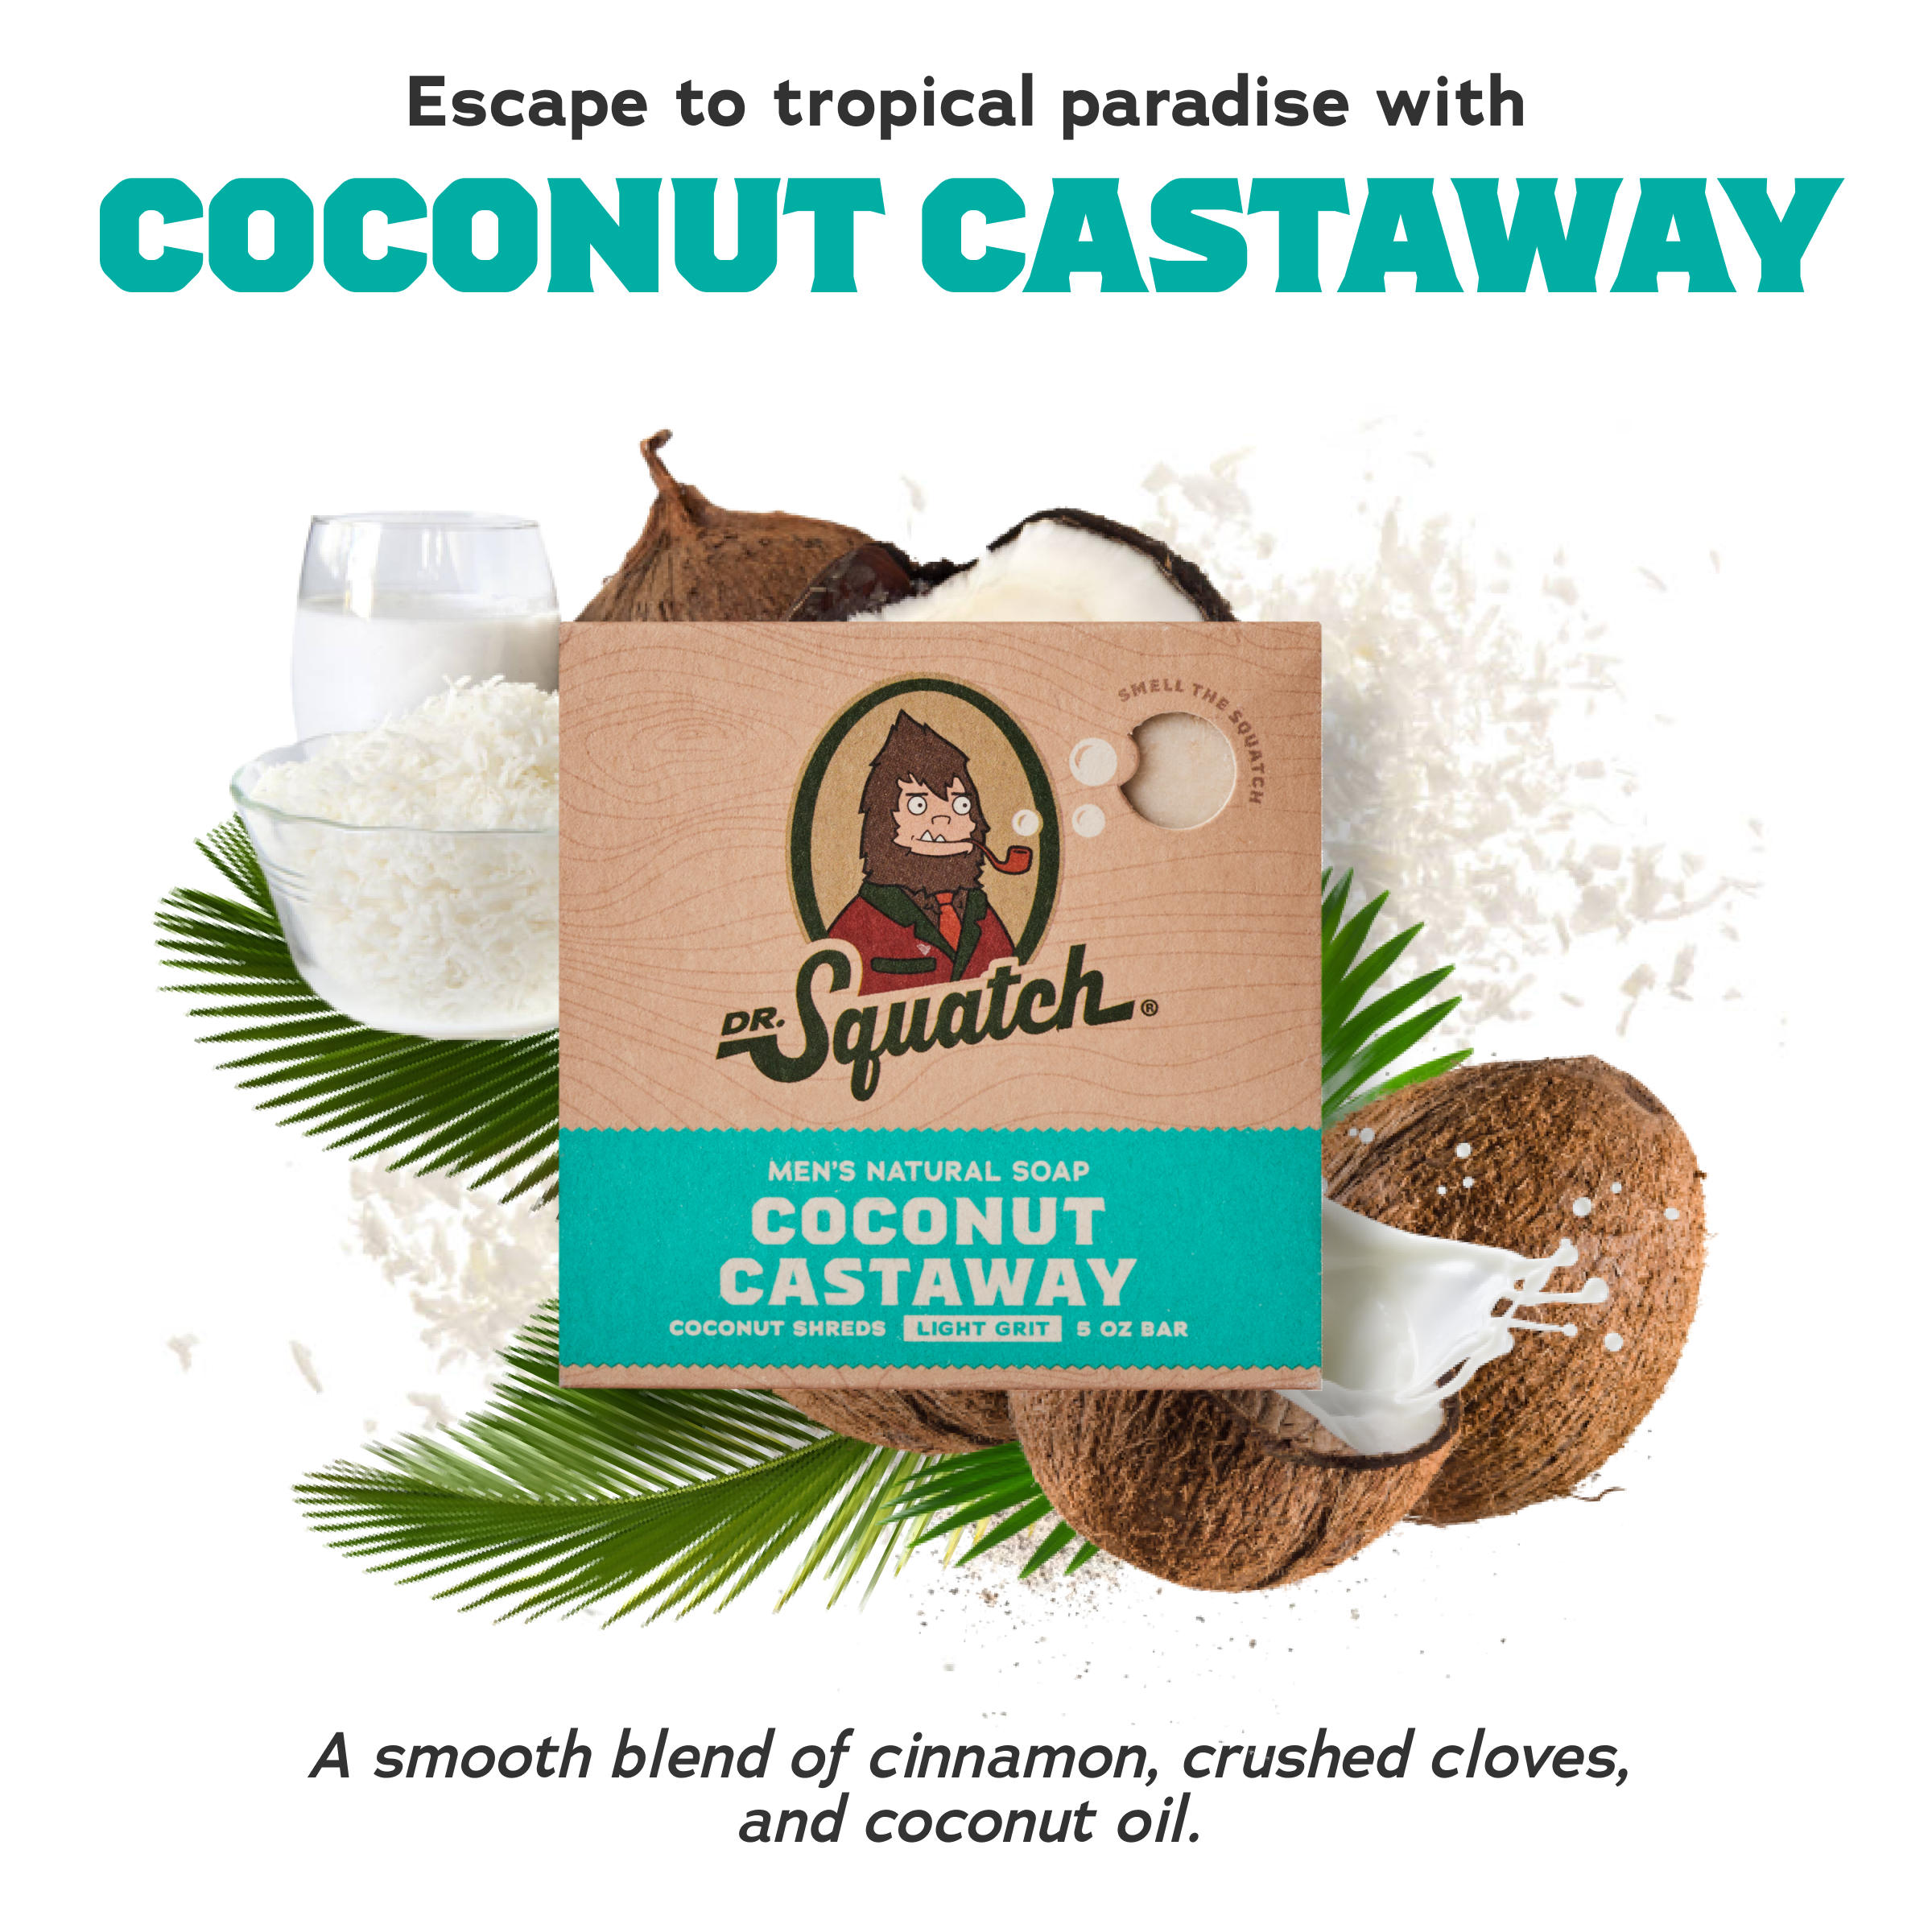 Dr. Squatch Coconut Castaway “Toasted Coconut” All-Natural Bar Soap 5oz